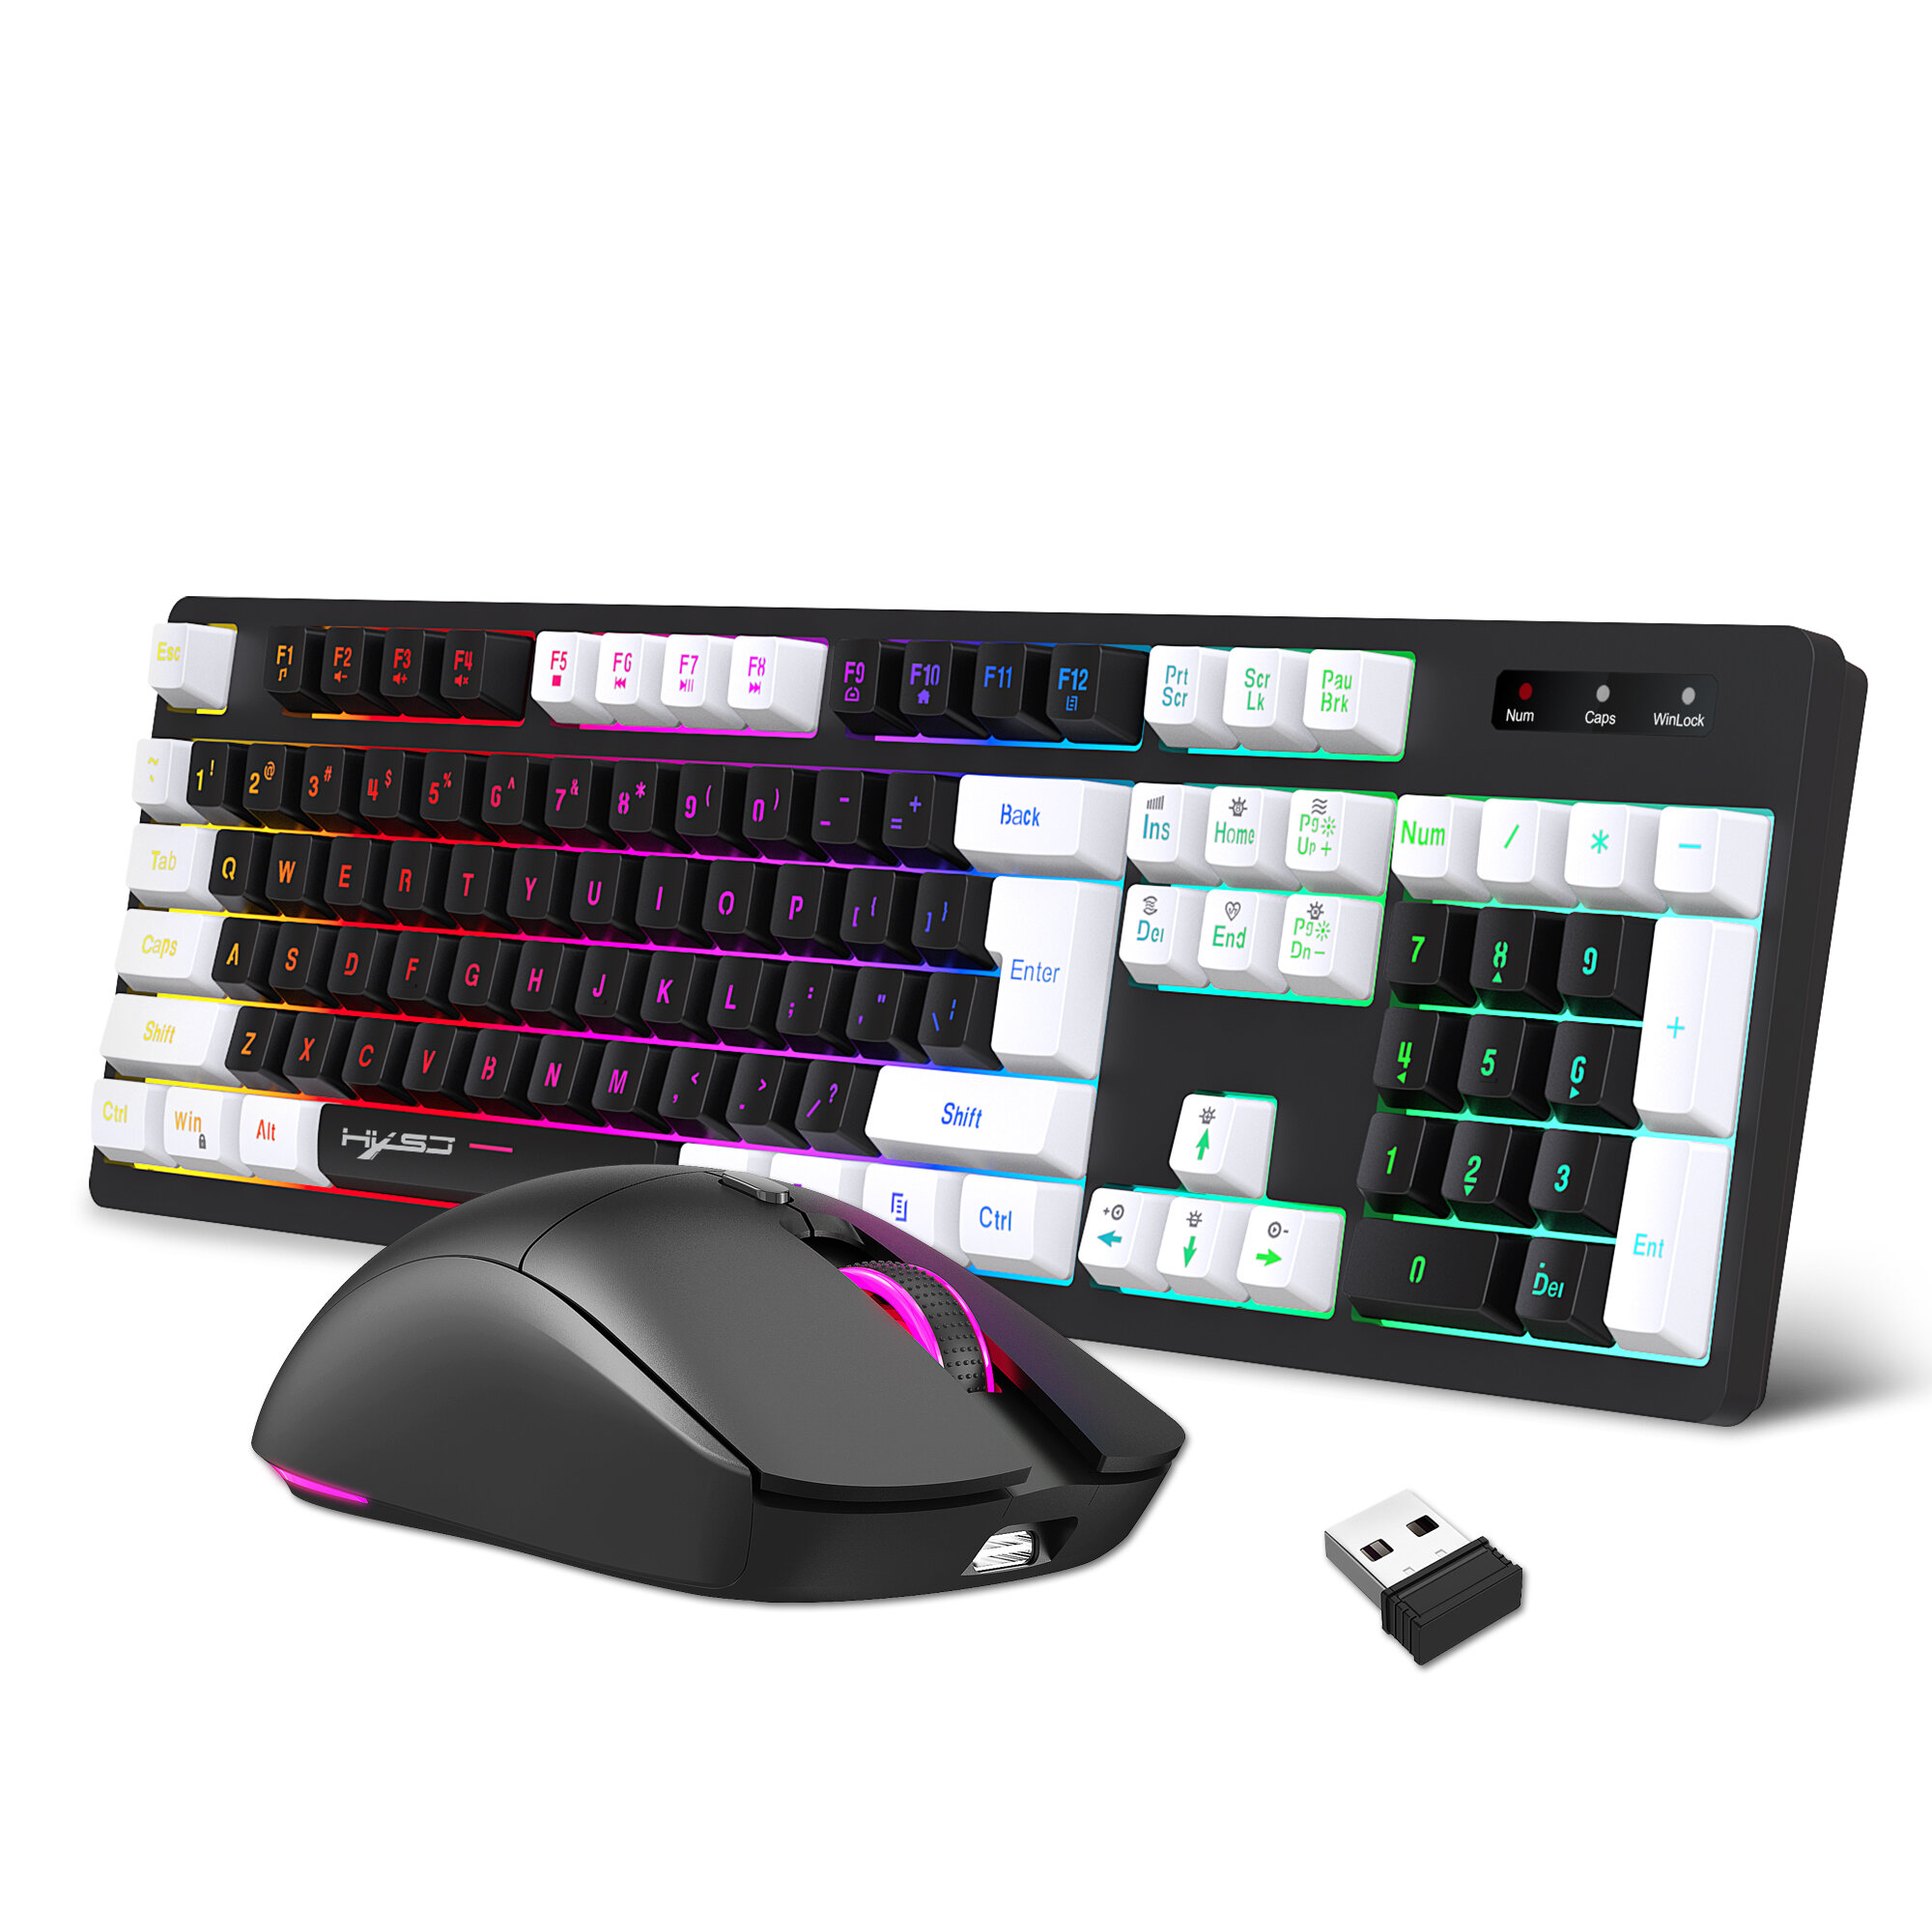 L98 Wireless 2.4G Keyboard and Mouse Kit 140 Key RGB Colorful Backlit Rechargeable Gaming for Computer PC Laptop